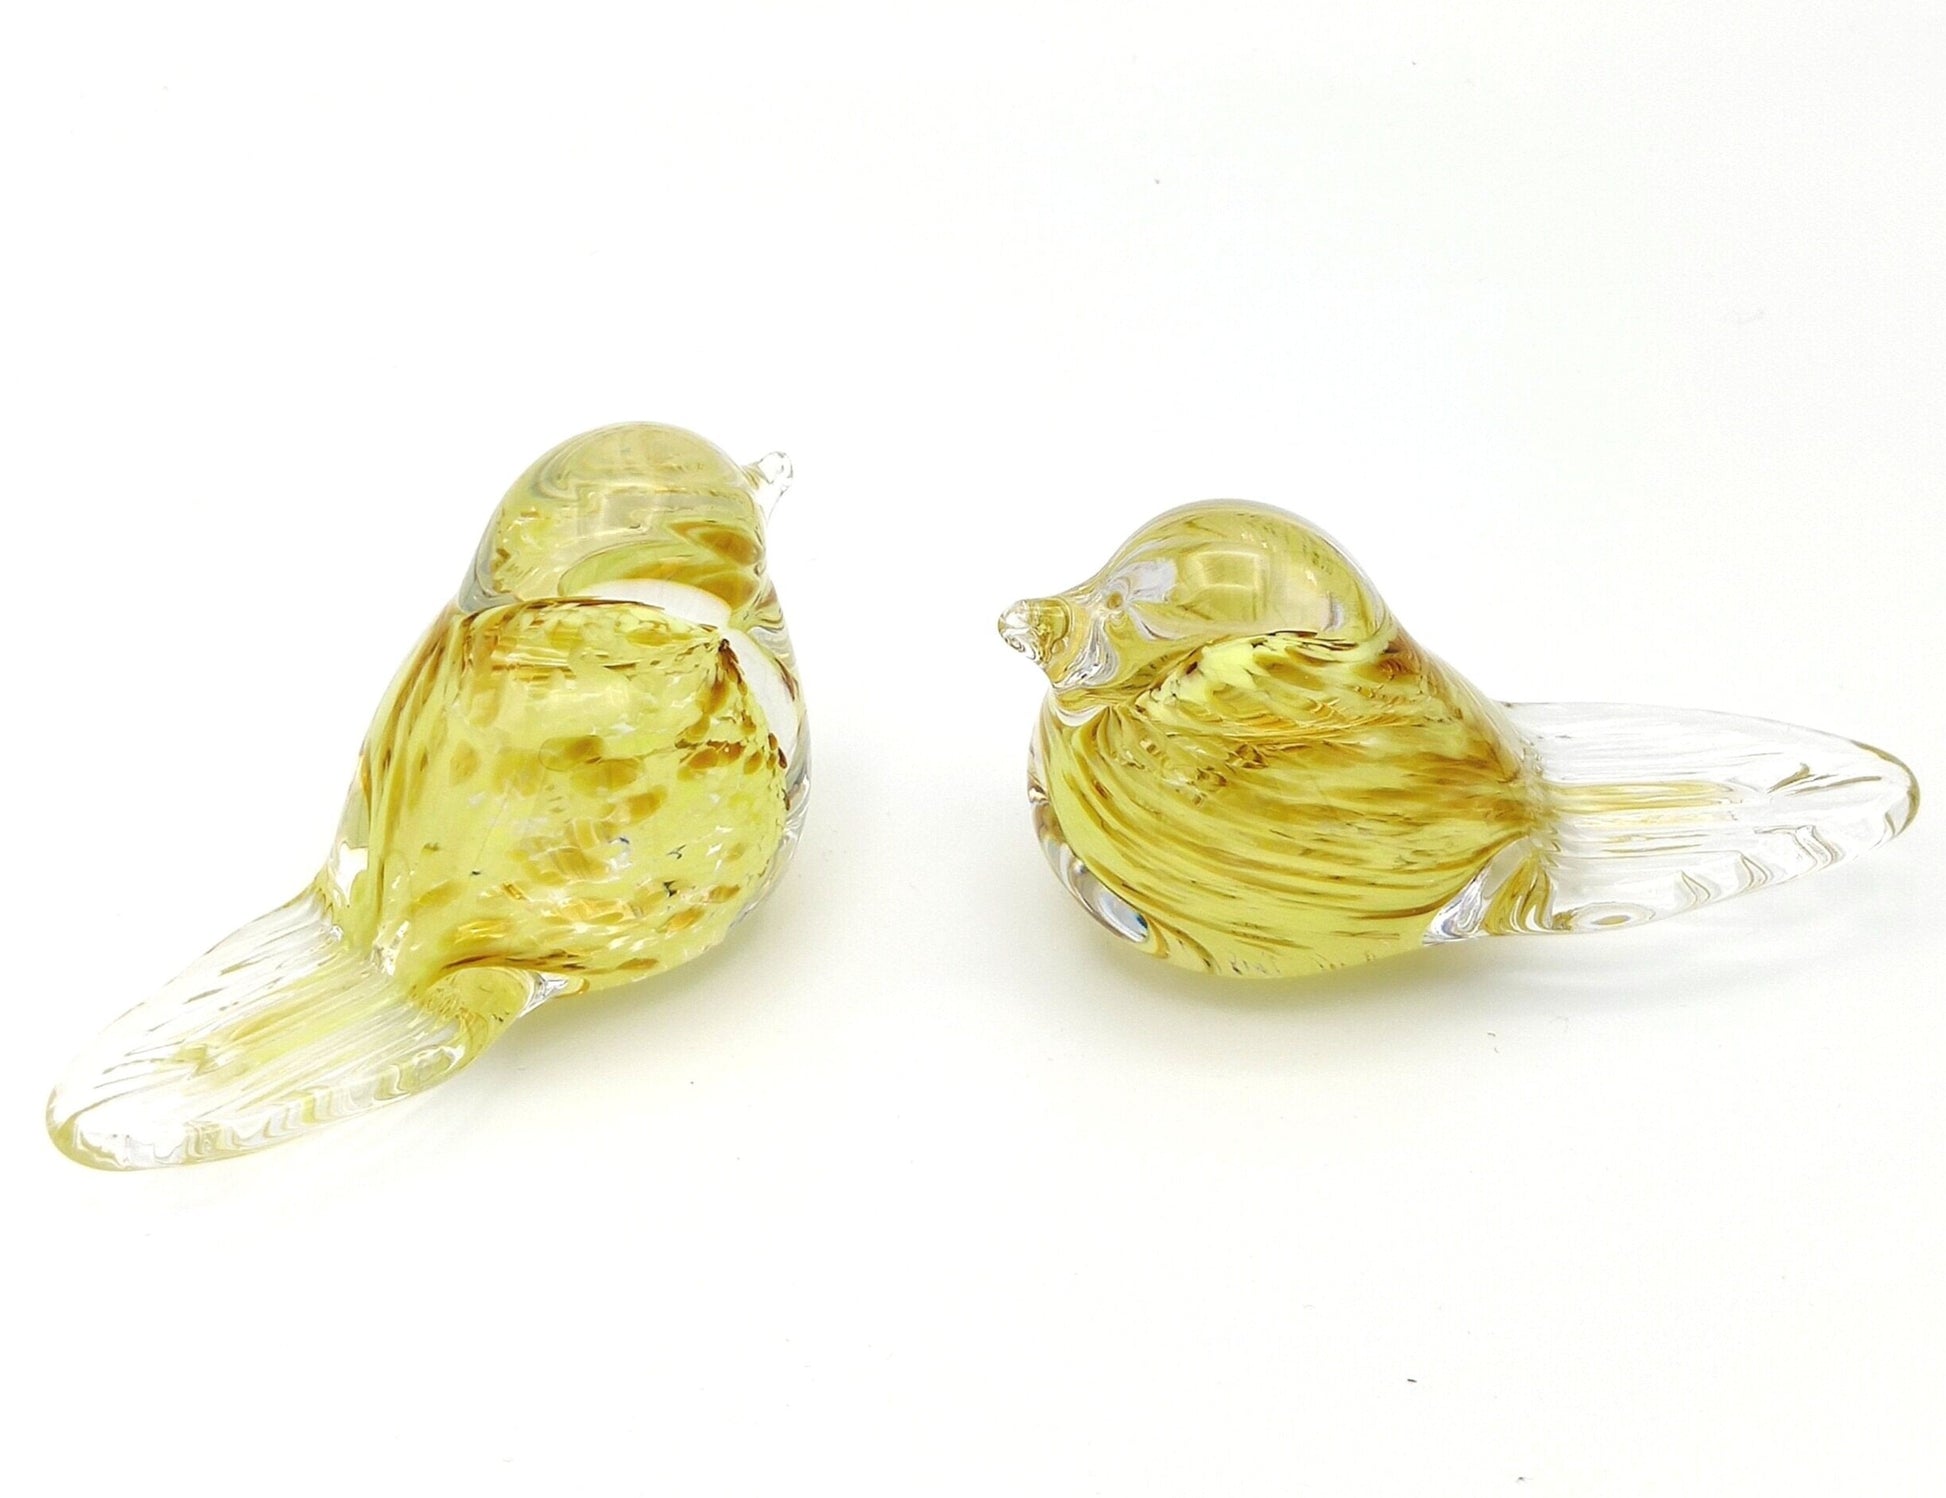 Pair of Speckled Love Birds by The Irish Handmade Glass Company